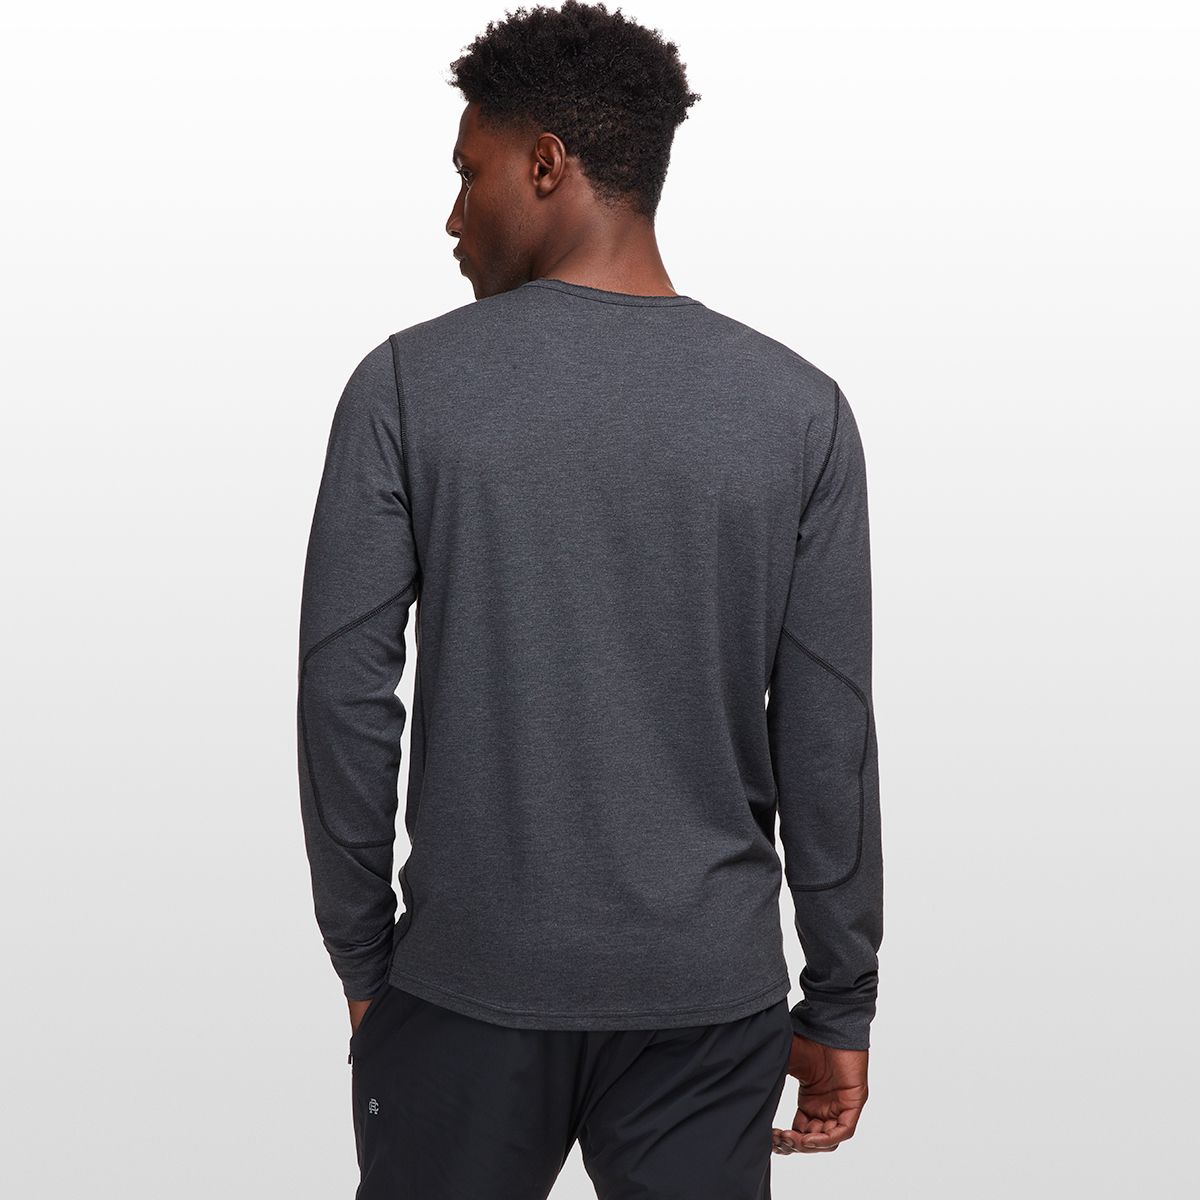 Backcountry Thermal Henley - Men's | Backcountry.com